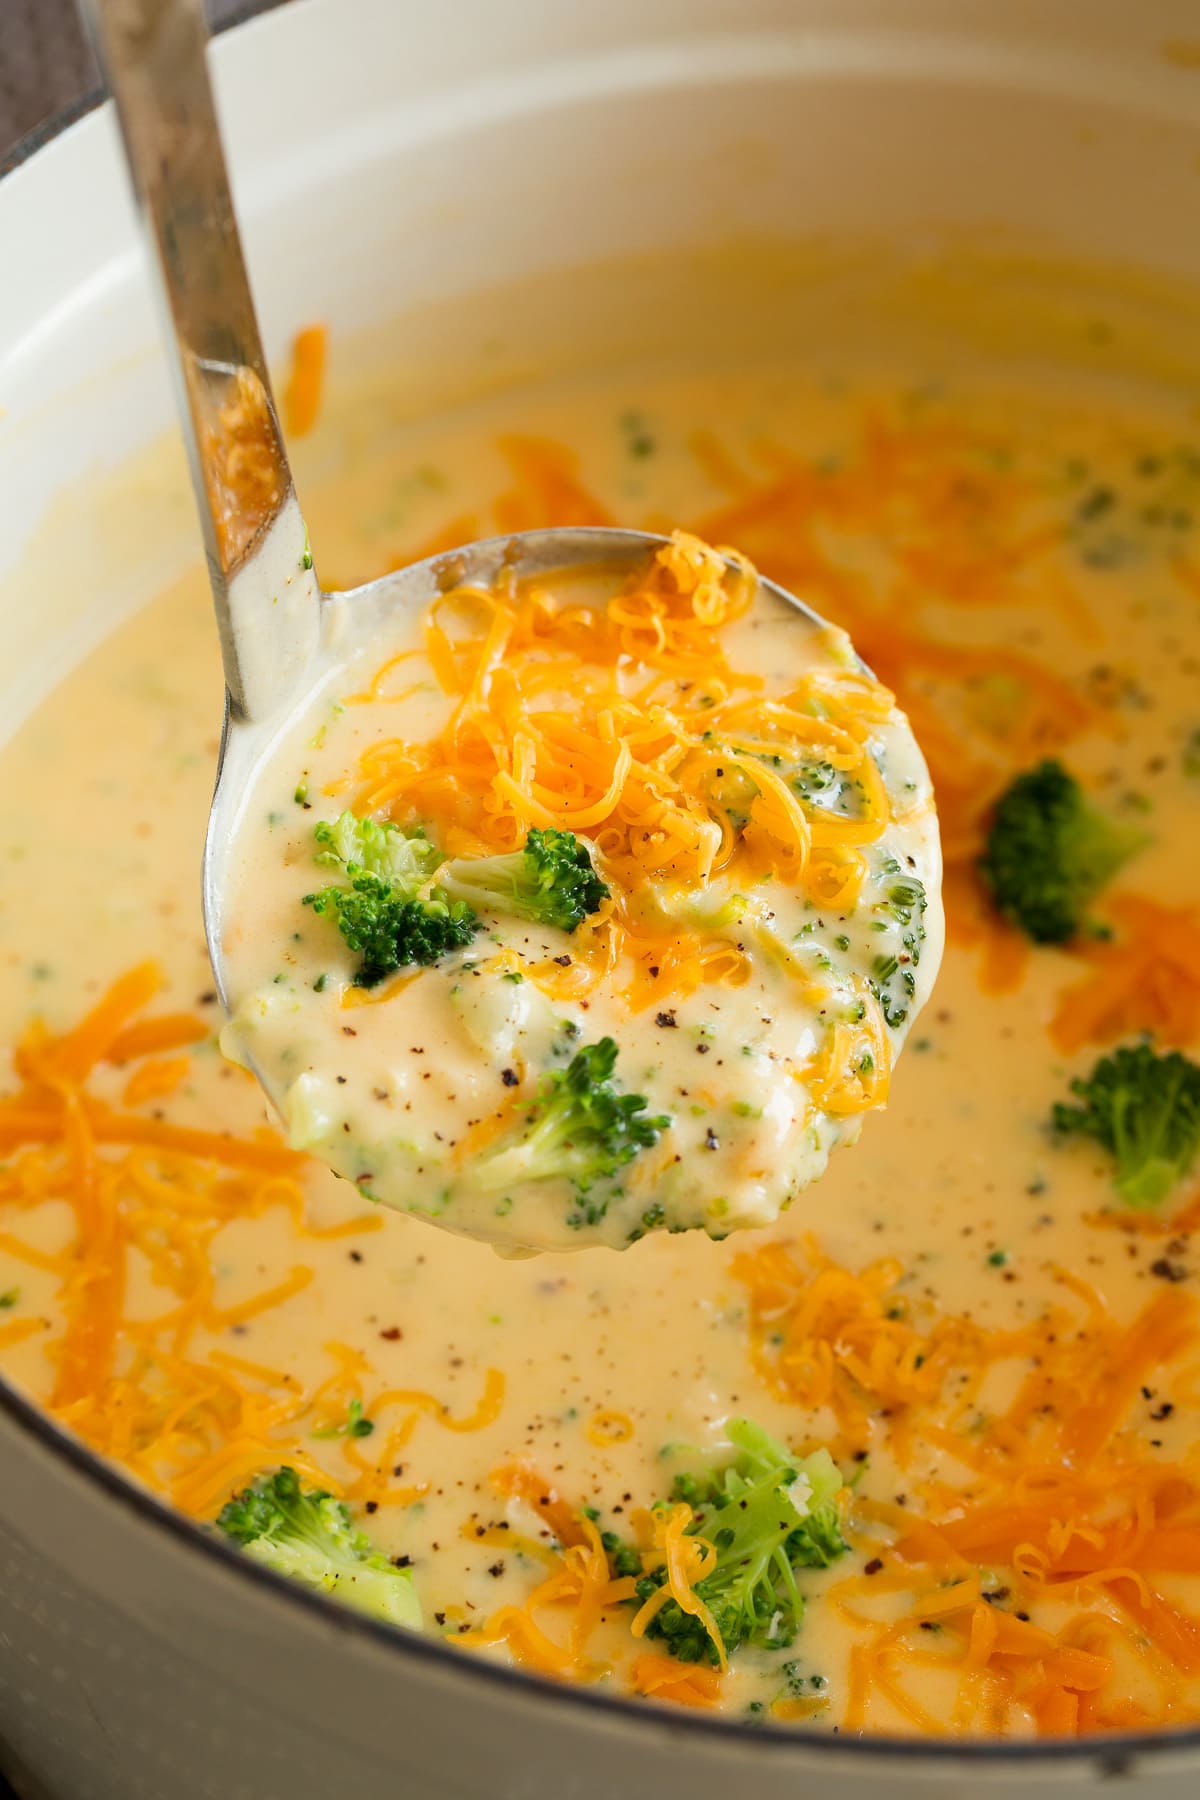 Ladle full of broccoli cheese soup lifted from a pot filled with soup.